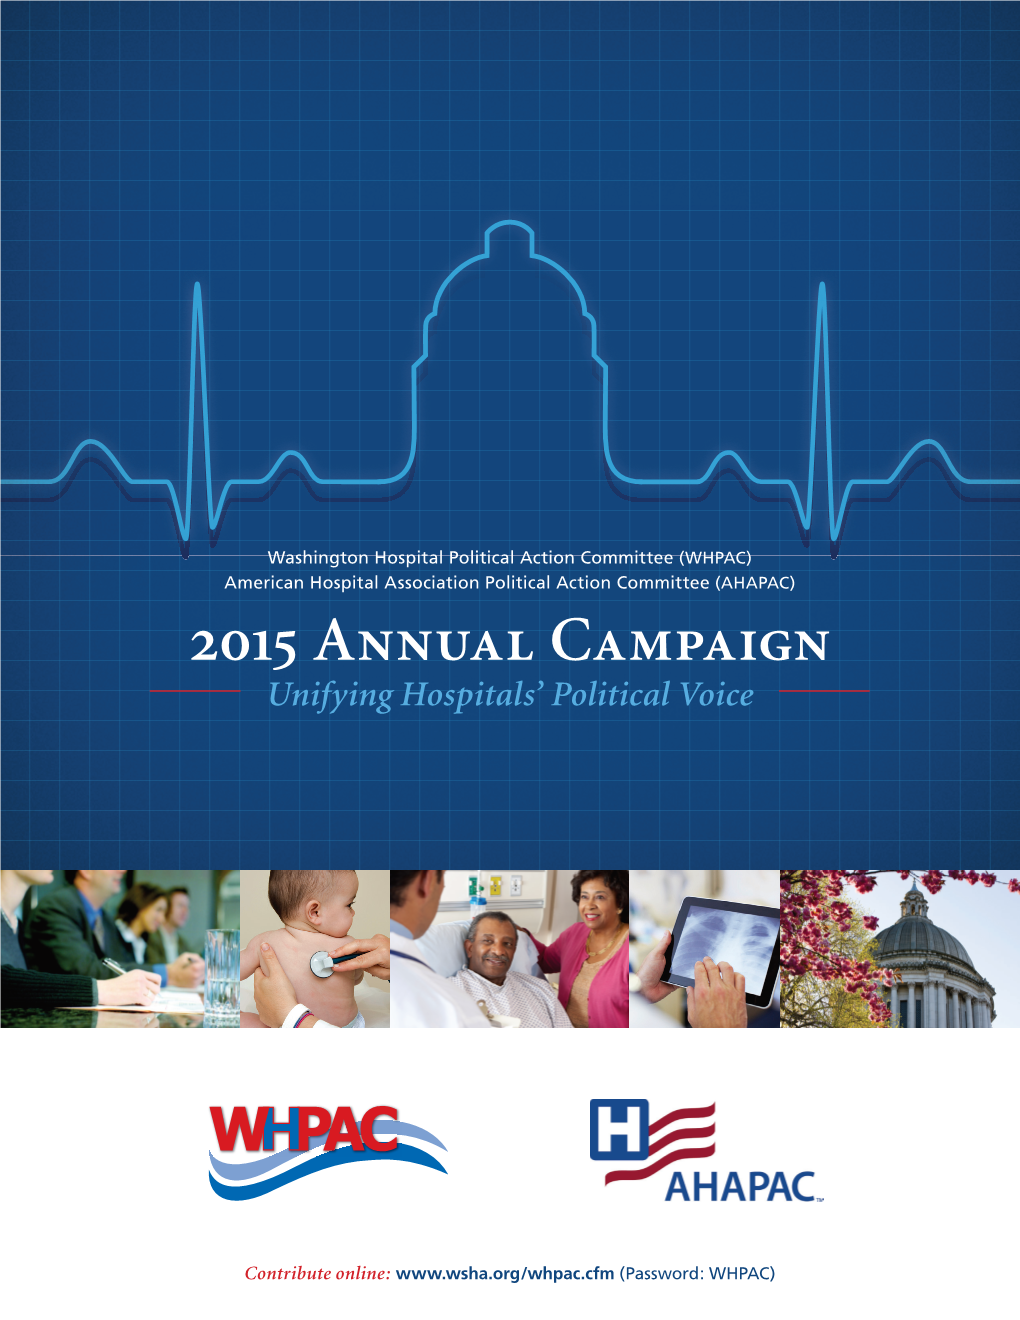 2015 Annual Campaign Unifying Hospitals’ Political Voice